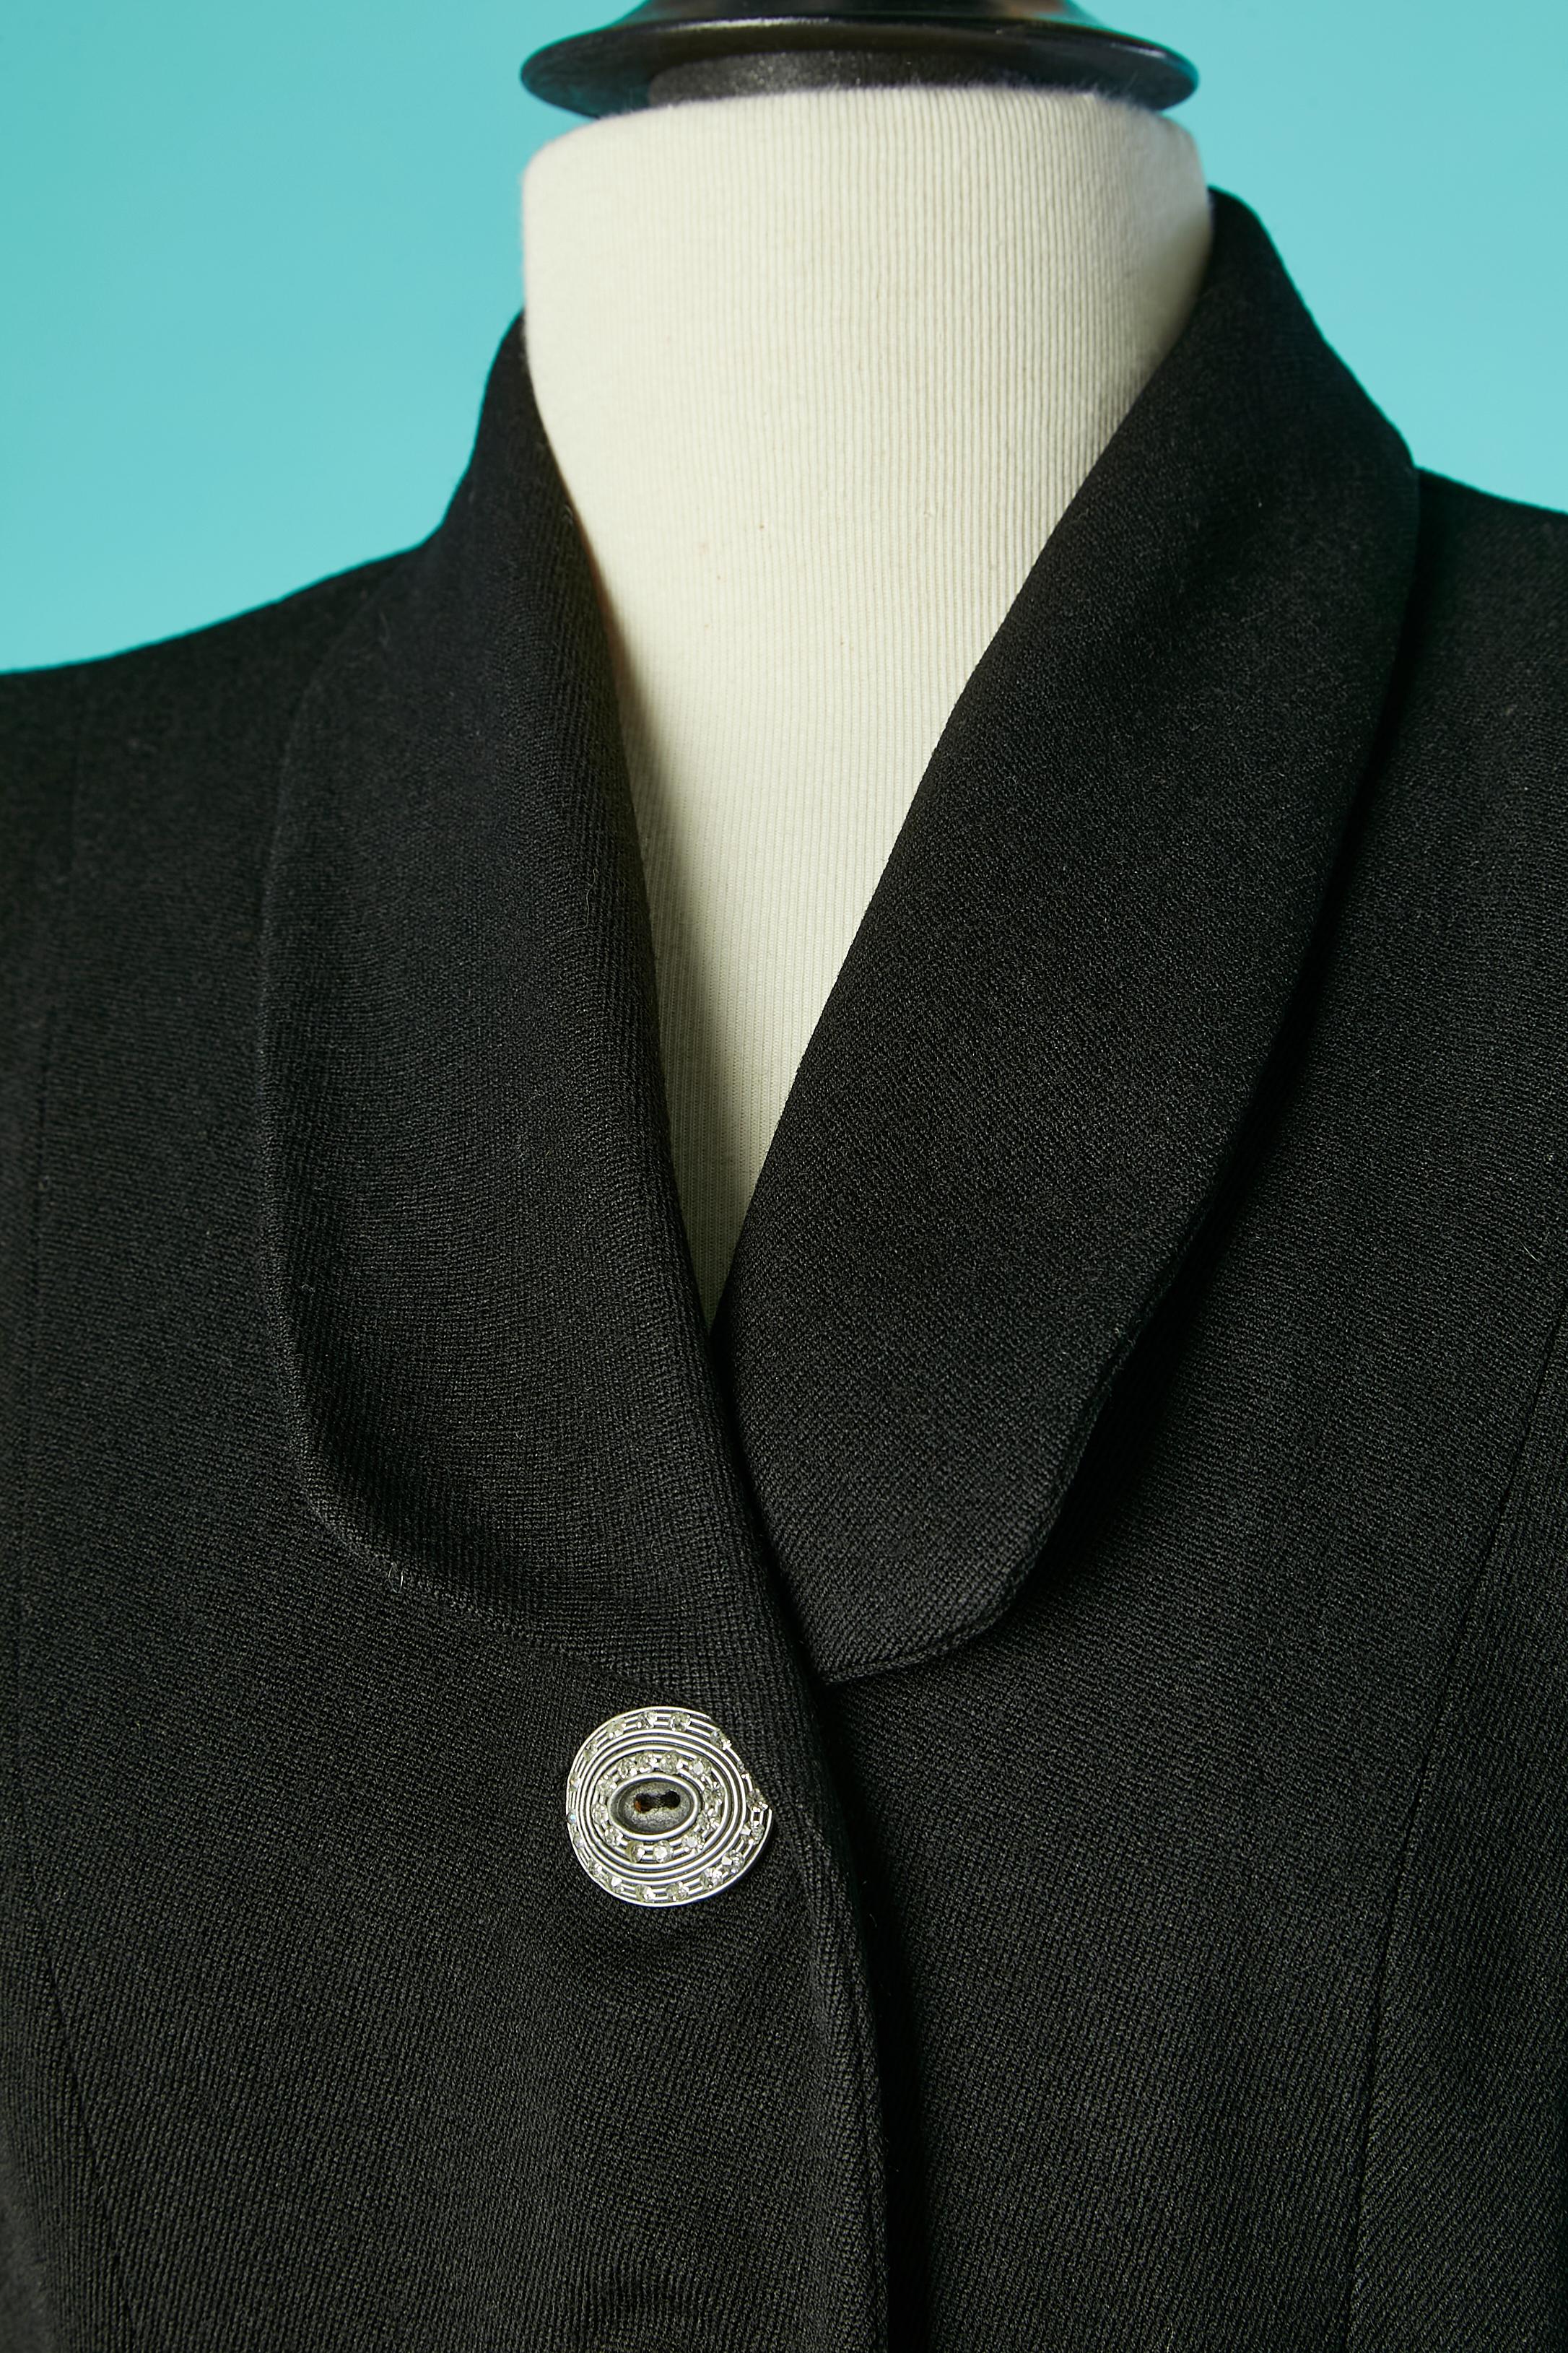 Black wool skirt-suit with jewlery  rhinestone buttons and cut-work. Rayon lining. Thick Shoulder-pads. Fake pockets. Godets on the bottom back of the jacket. Pleated satin details on the bottom of the skirt ( which could be in the back, not on the